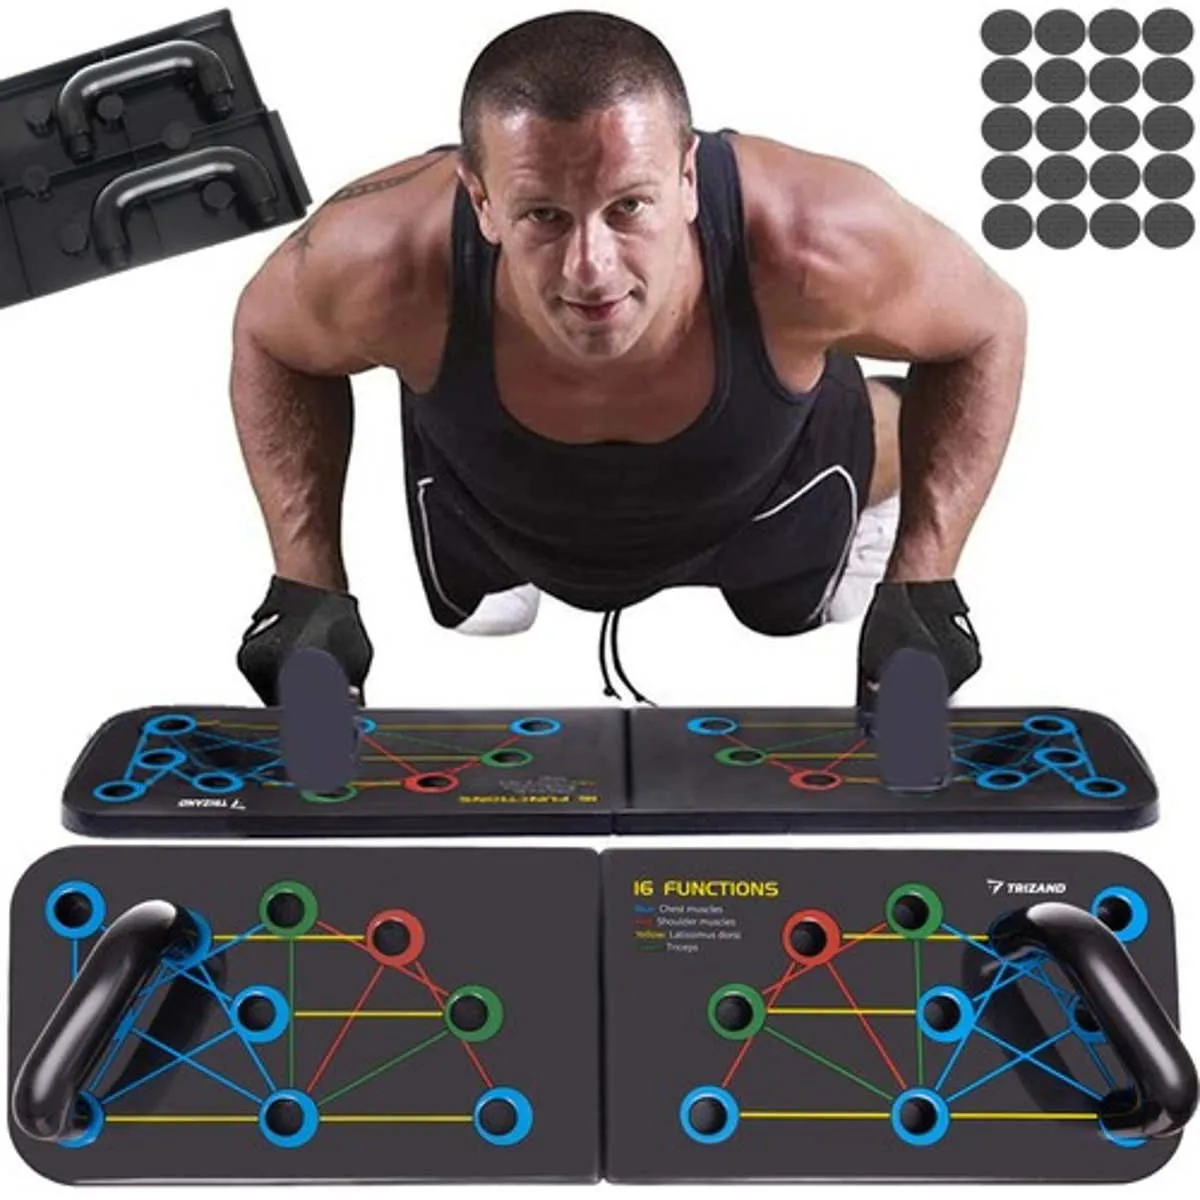 Push-up board with handles